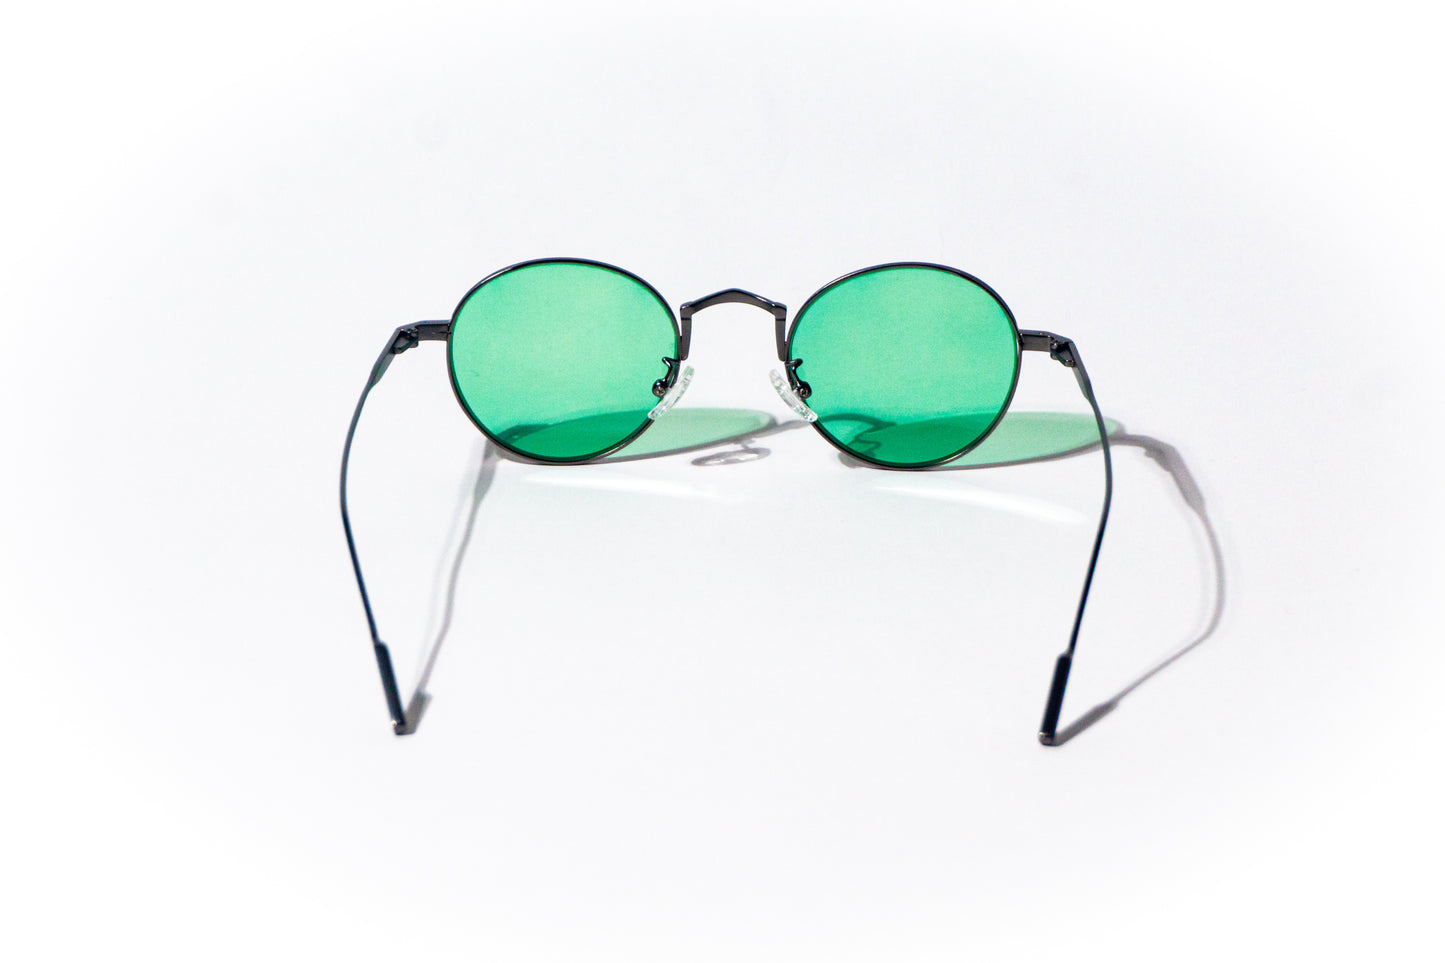 Round Green with Grey Sunglasses